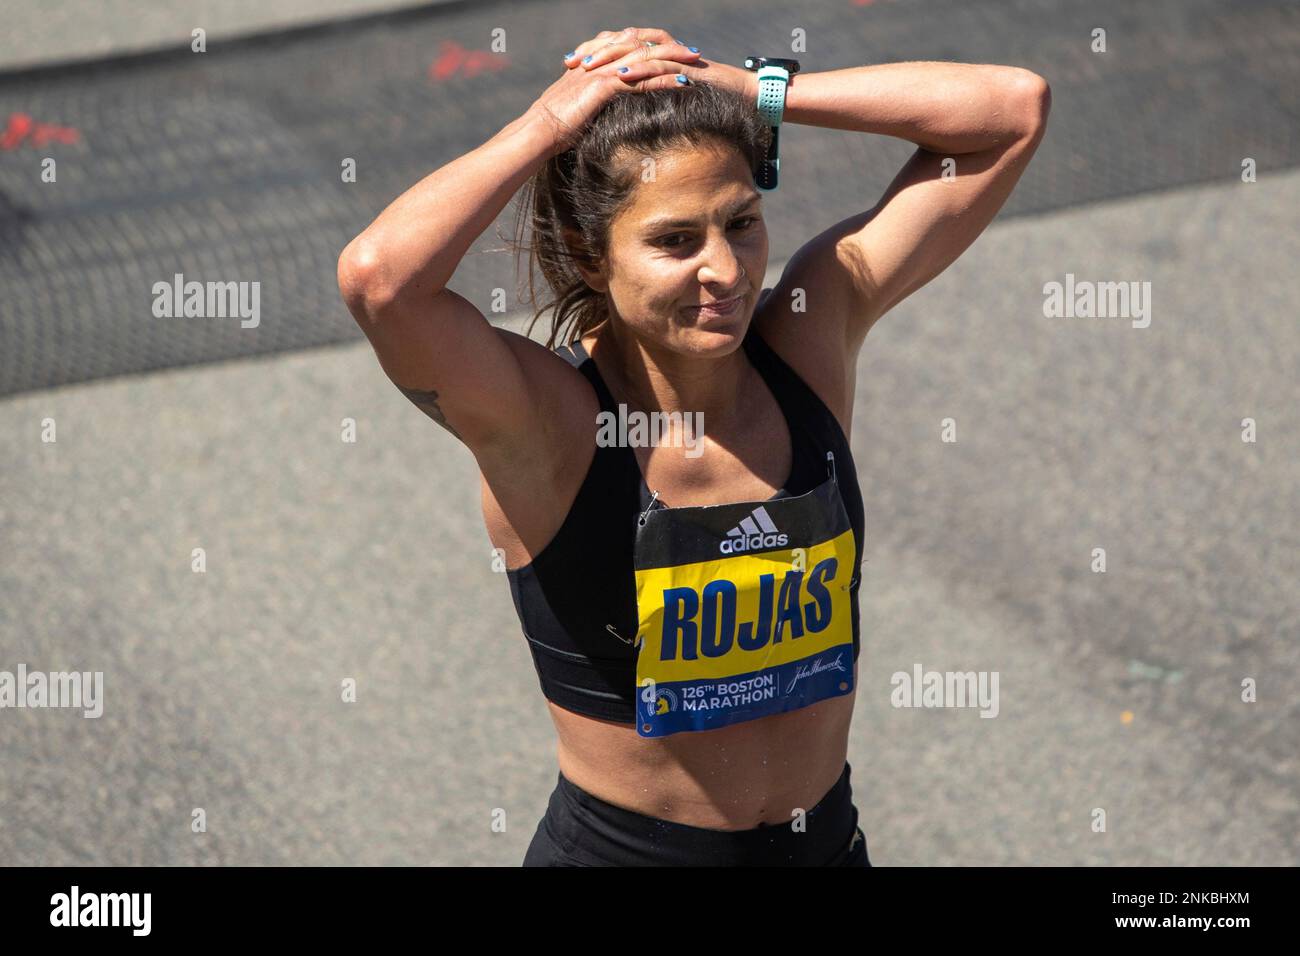 BOSTON, MA - APRIL 18: Nell Rojas of the United States of America reacts to  completing the Boston Marathon on April 18, 2022 on Boylston Street in  Boston, MA. Rojas finished with